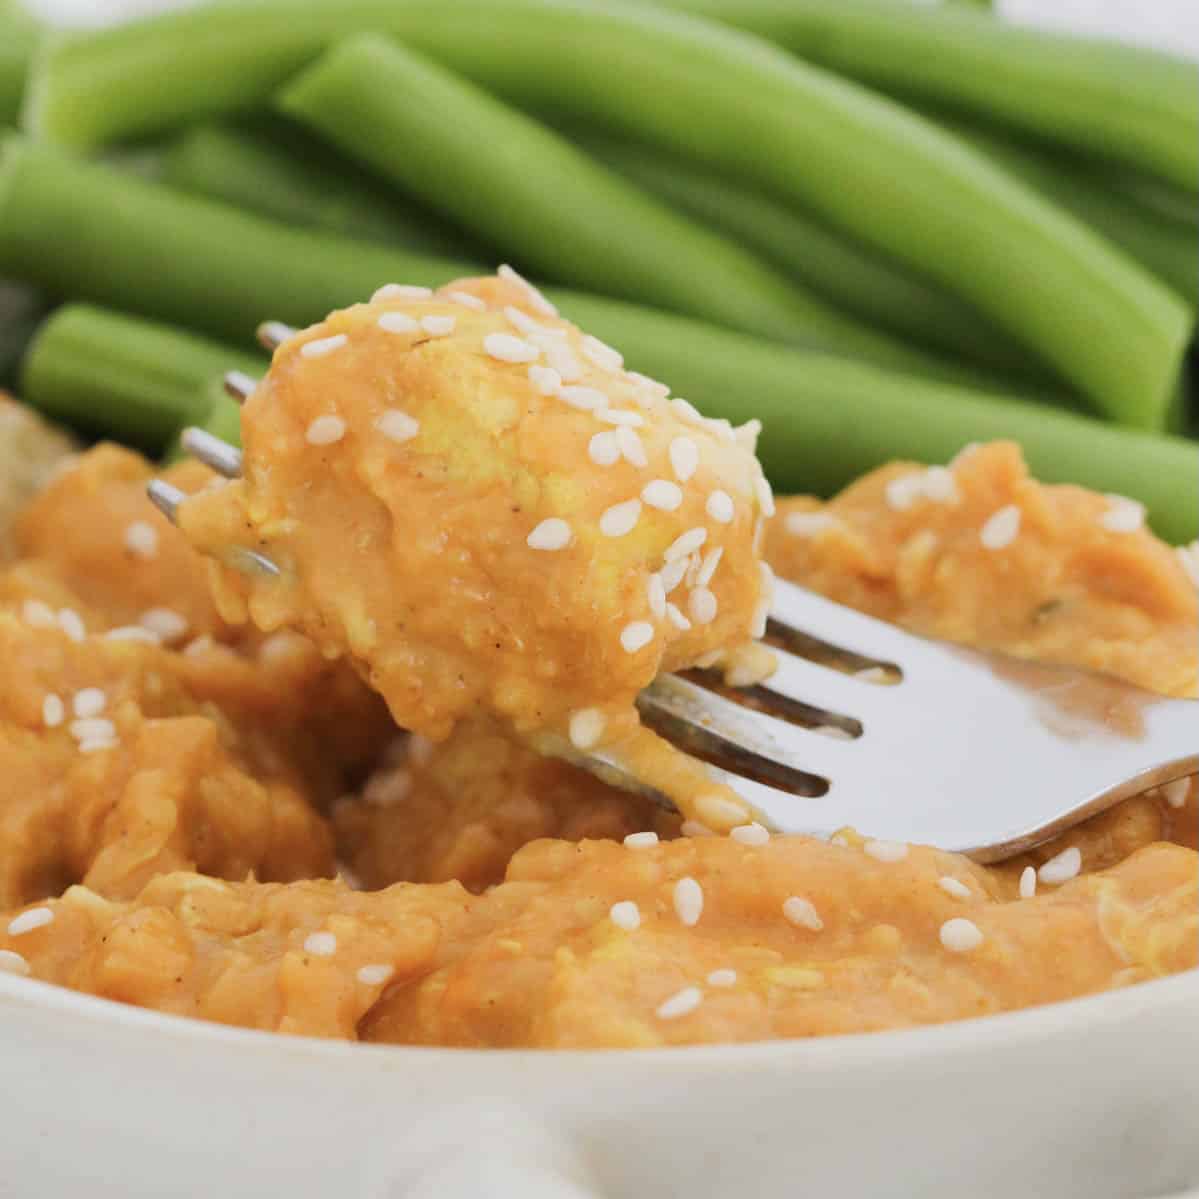 A piece of butter chicken on a fork with green vegetables.